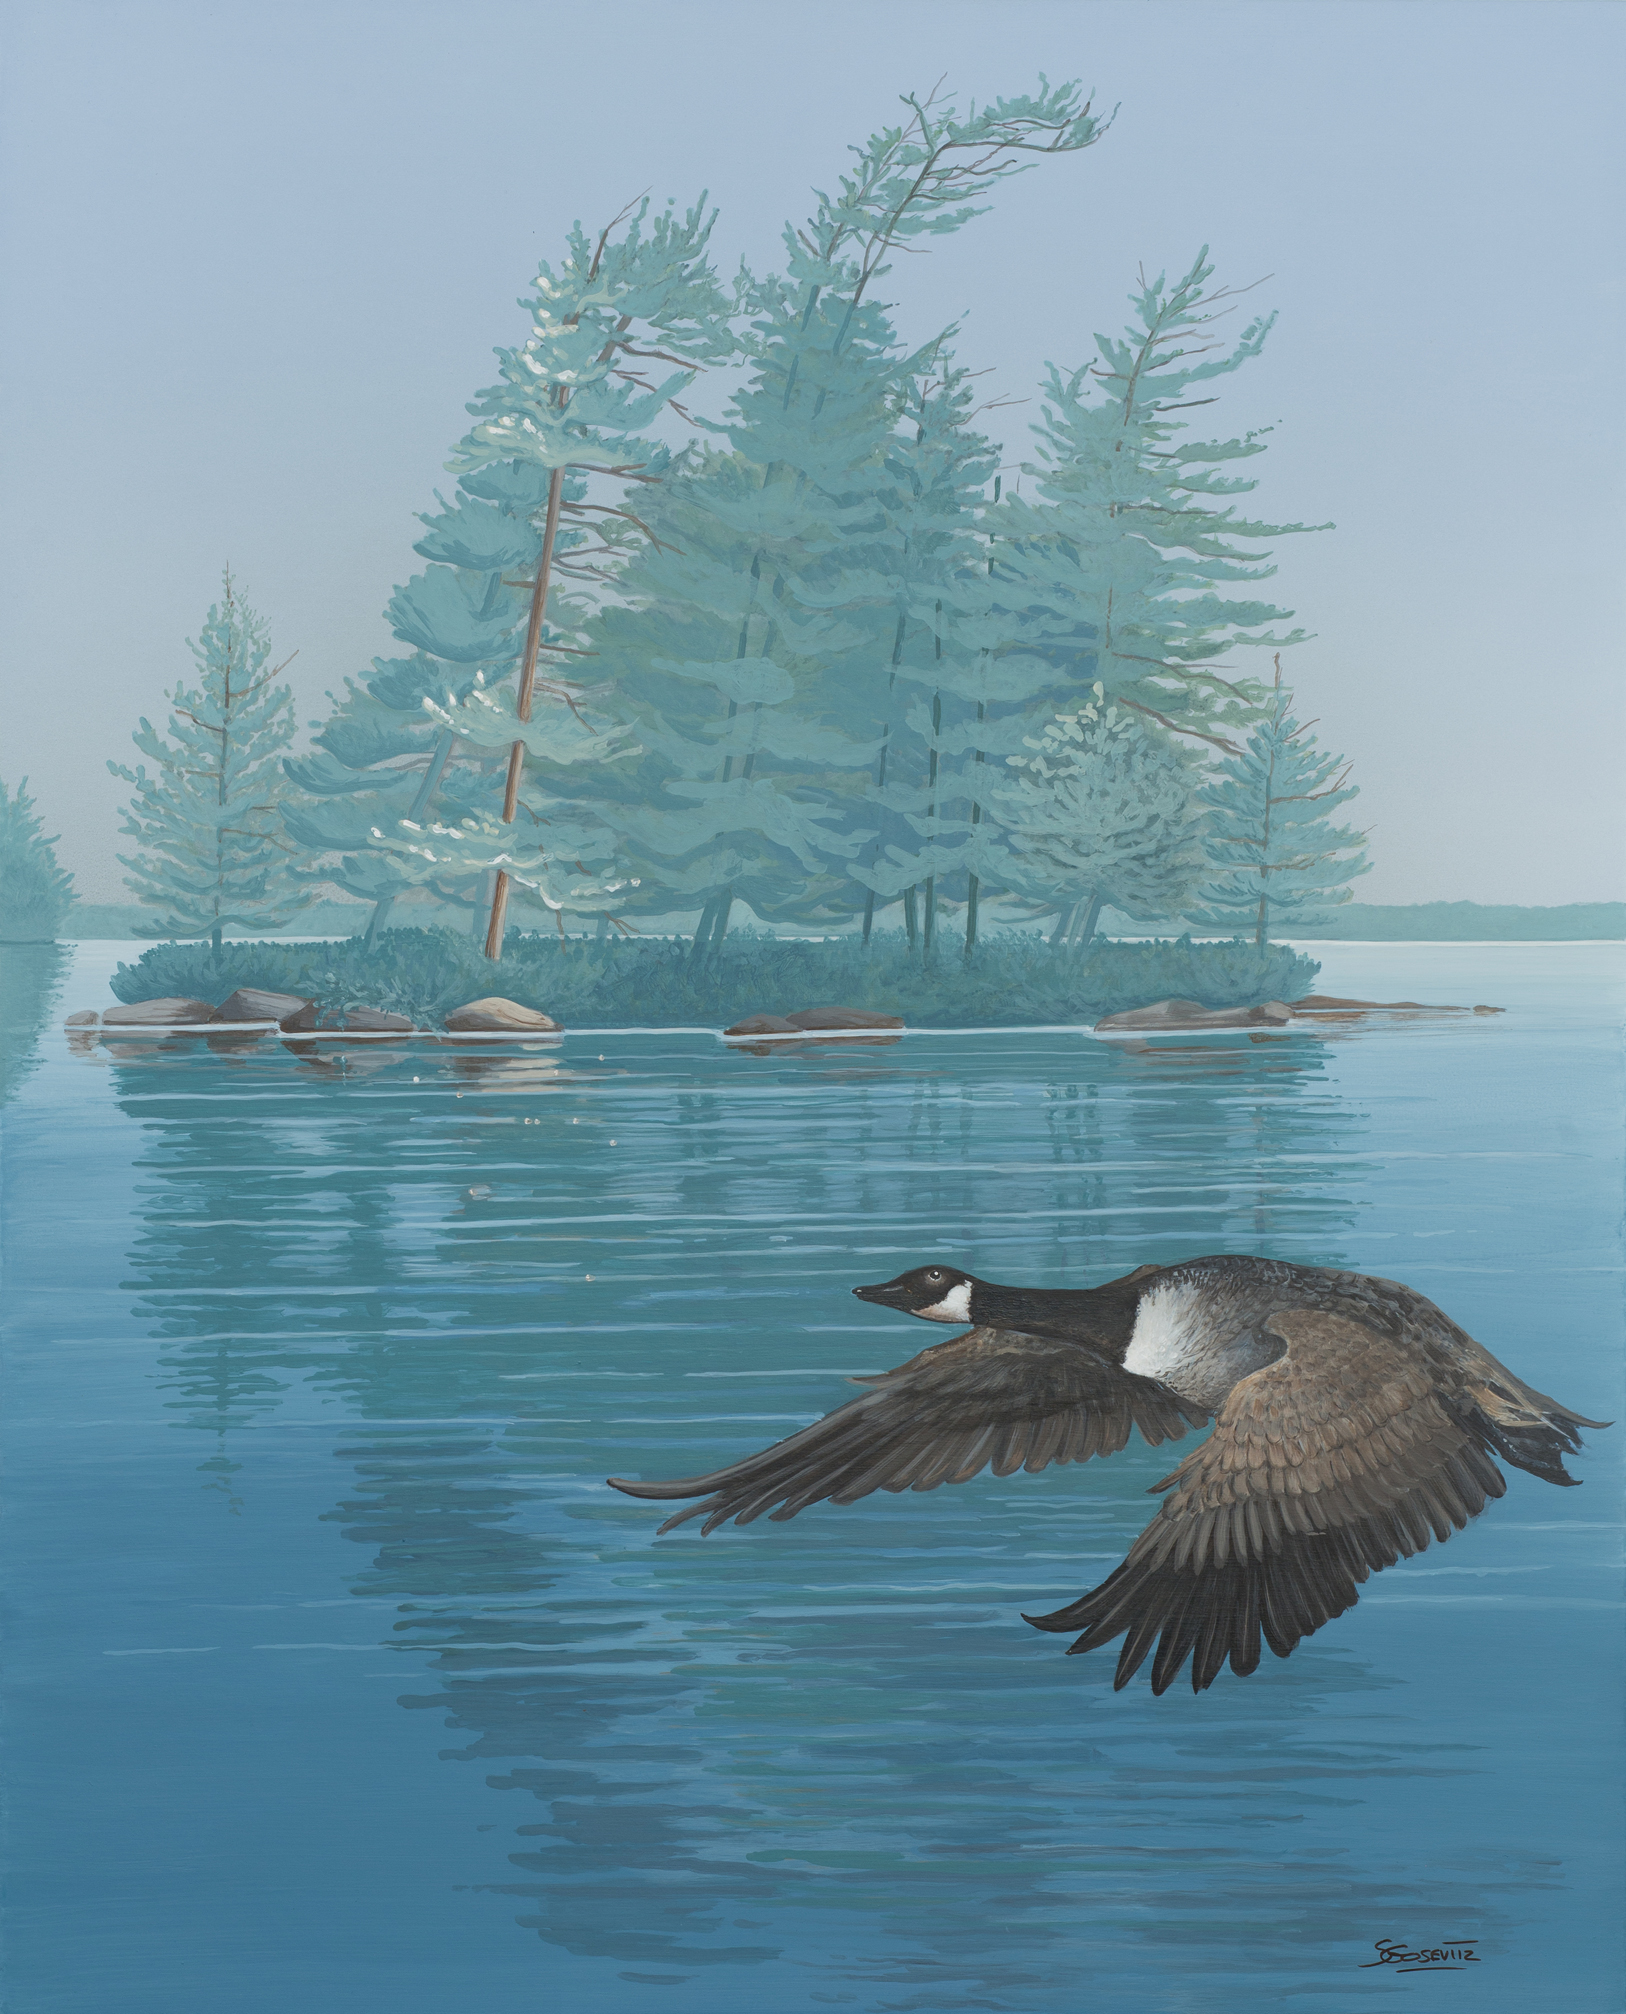 windswept island lake scene with a Canada geese flying in foreground